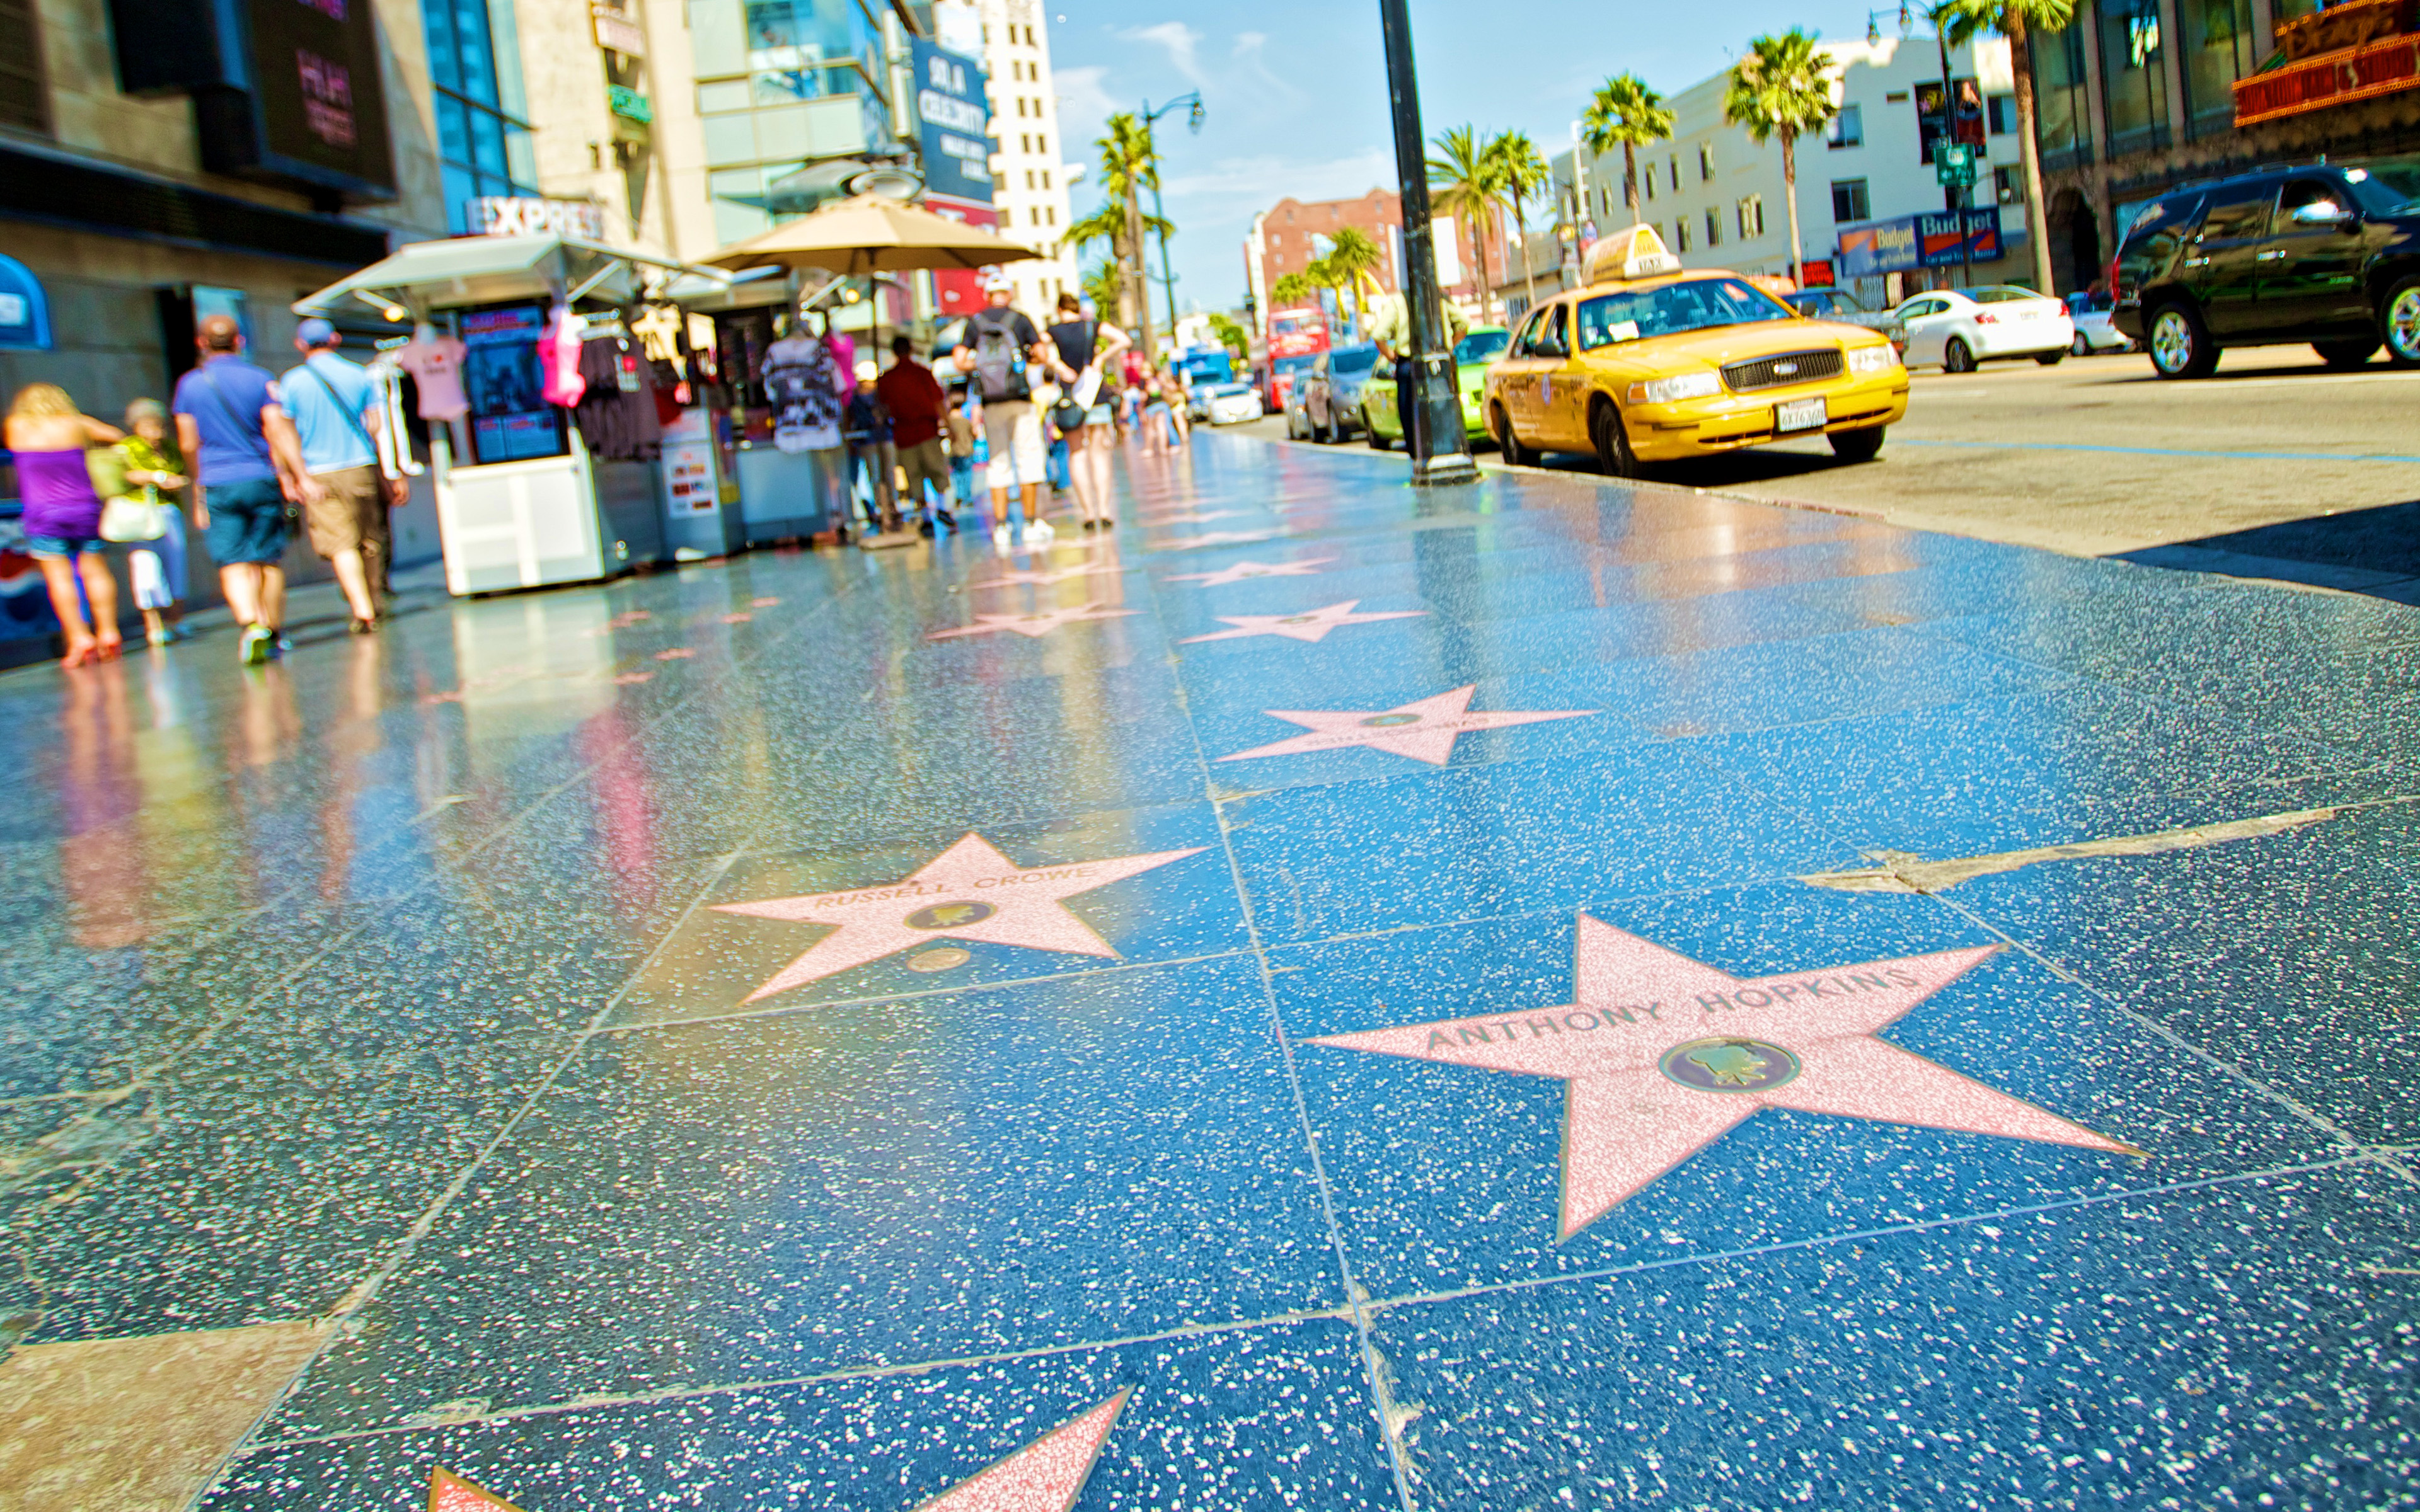 Hollywood Walk of Fame, 4k, Stars Alley, Hollywood, street, american cities...